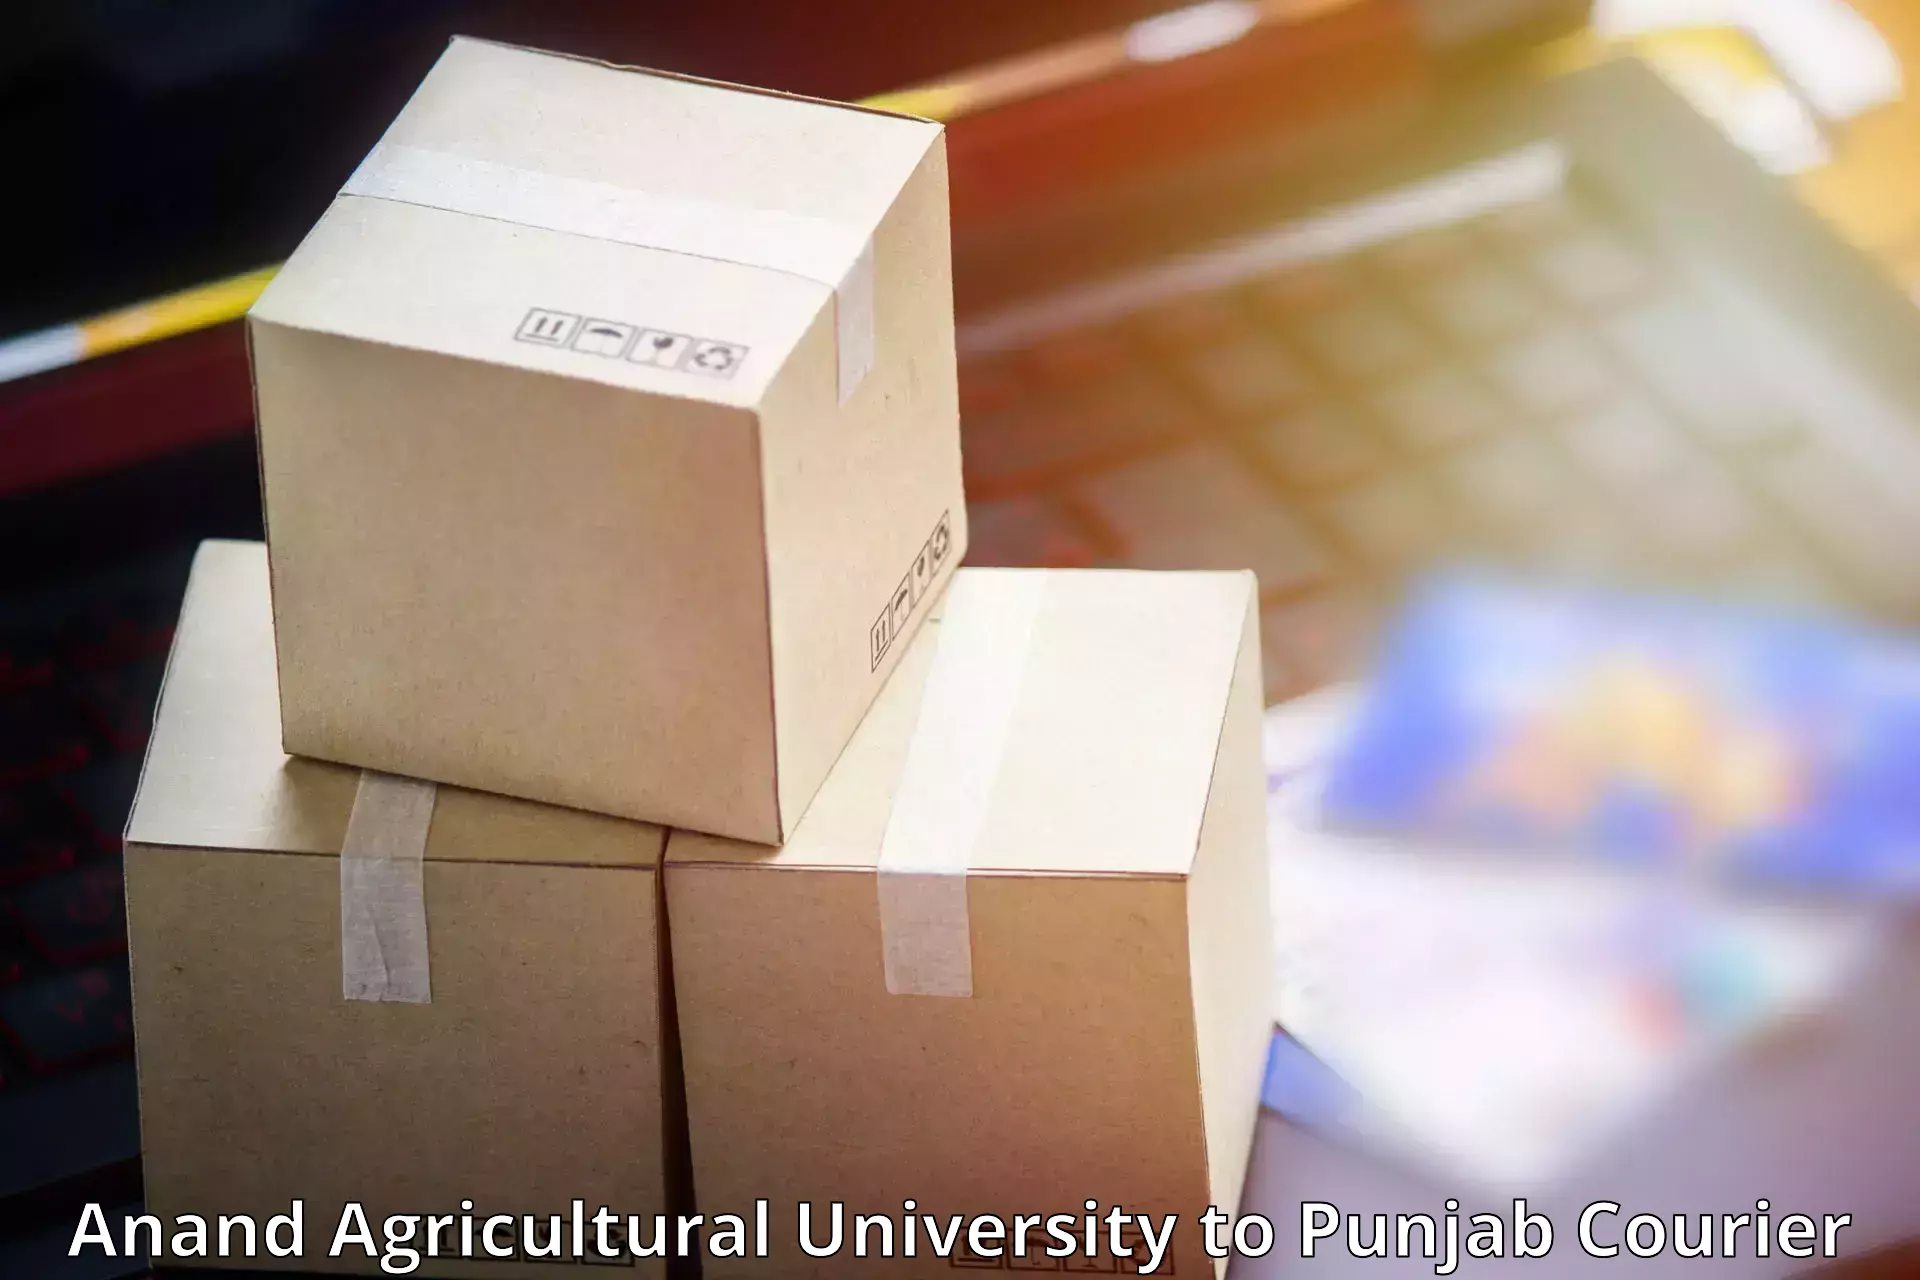 Multi-city courier Anand Agricultural University to Punjab